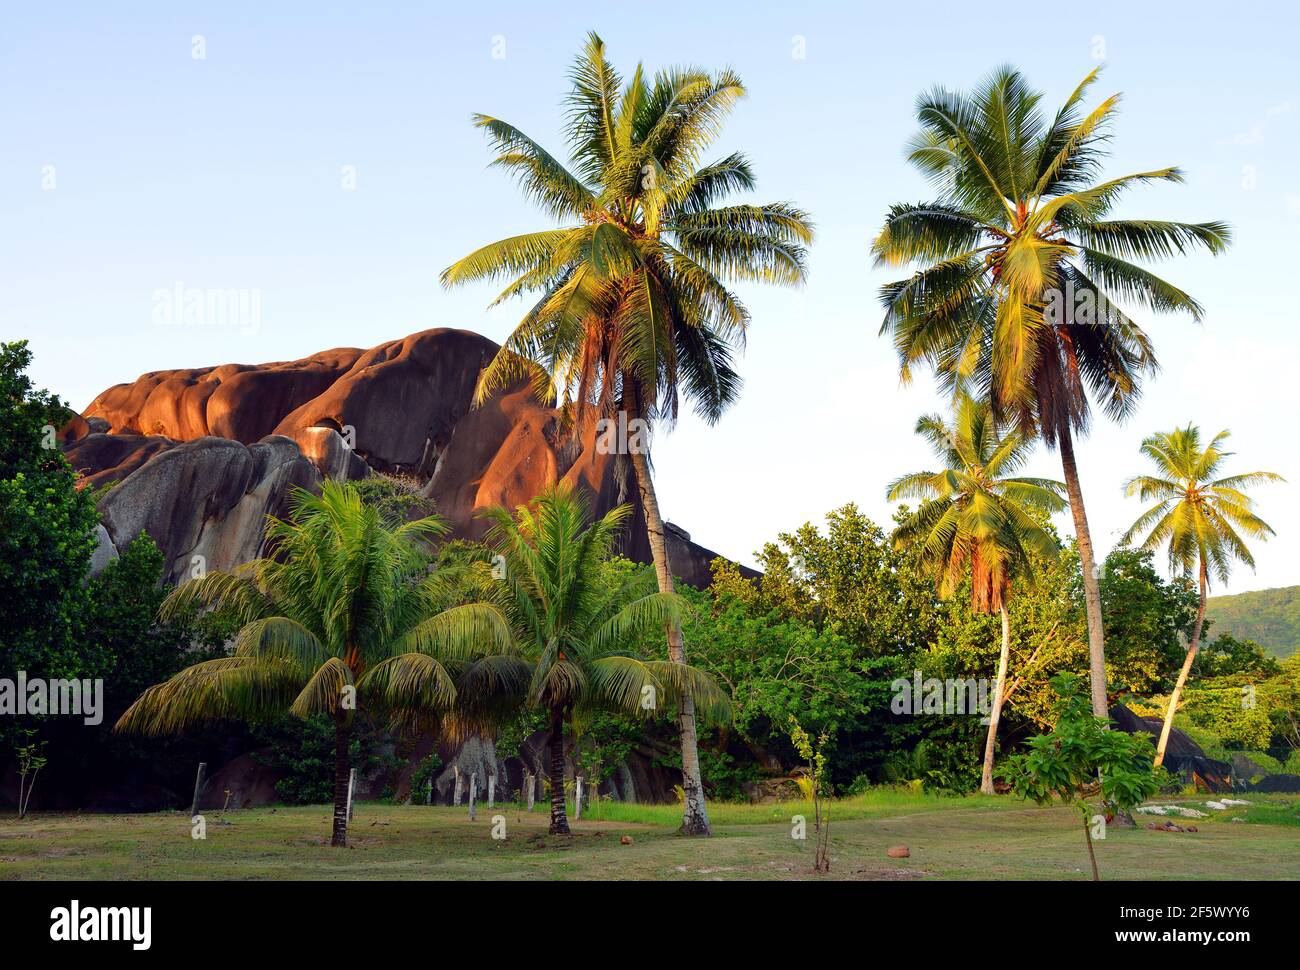 Tropical landscape with coconut palm trees. La Digue island, Indian Ocean, Seychelles. Stock Photo